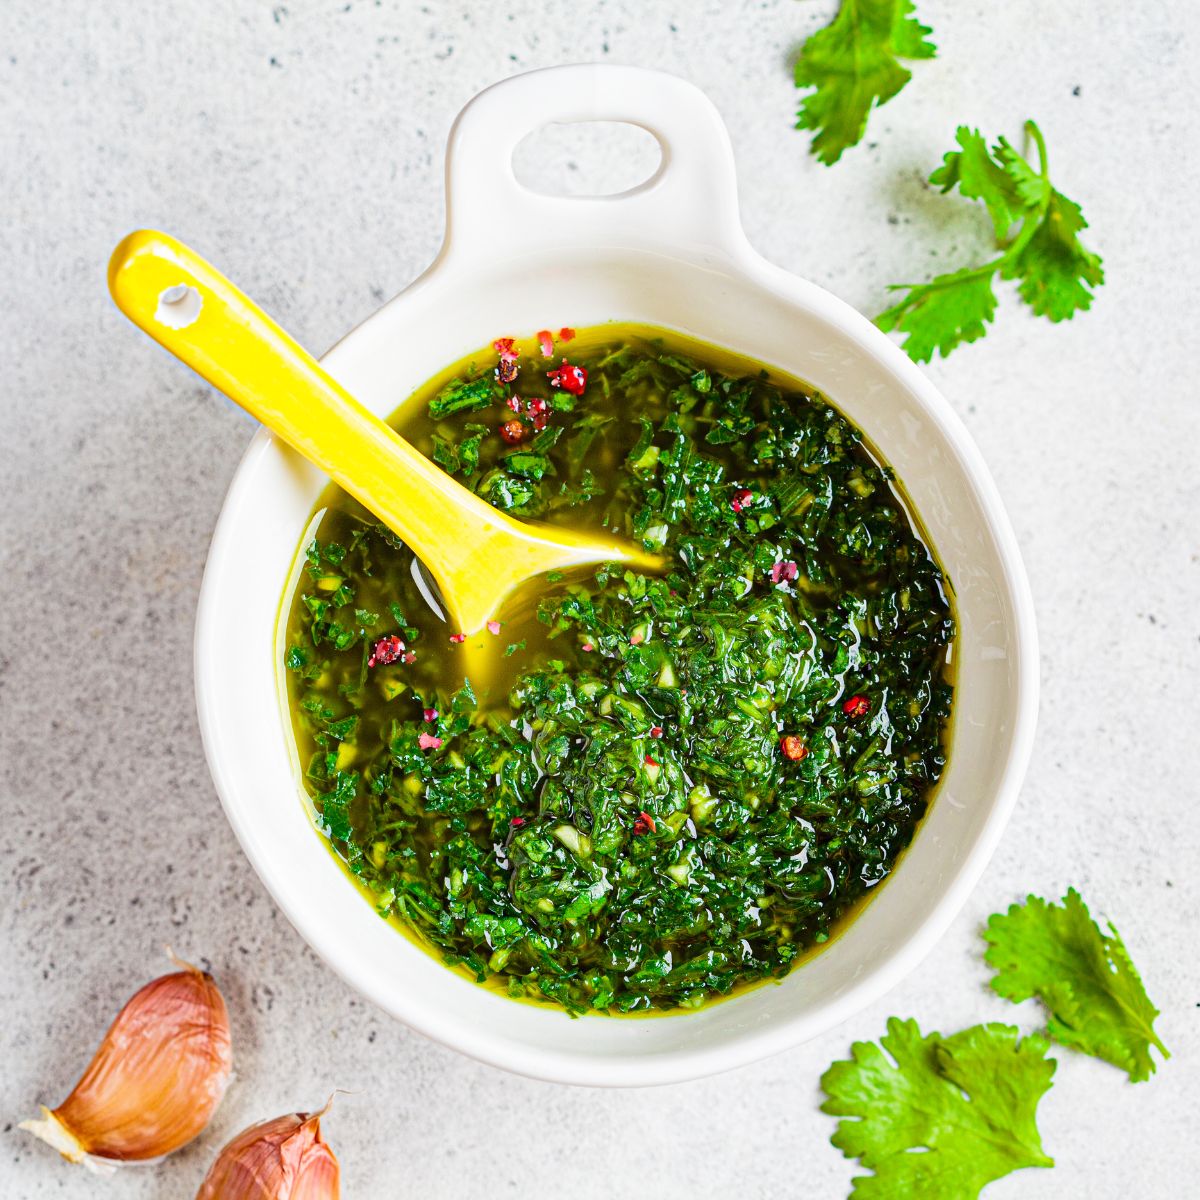 Bowl of green chimichurri sauce, made with fresh herbs and spices